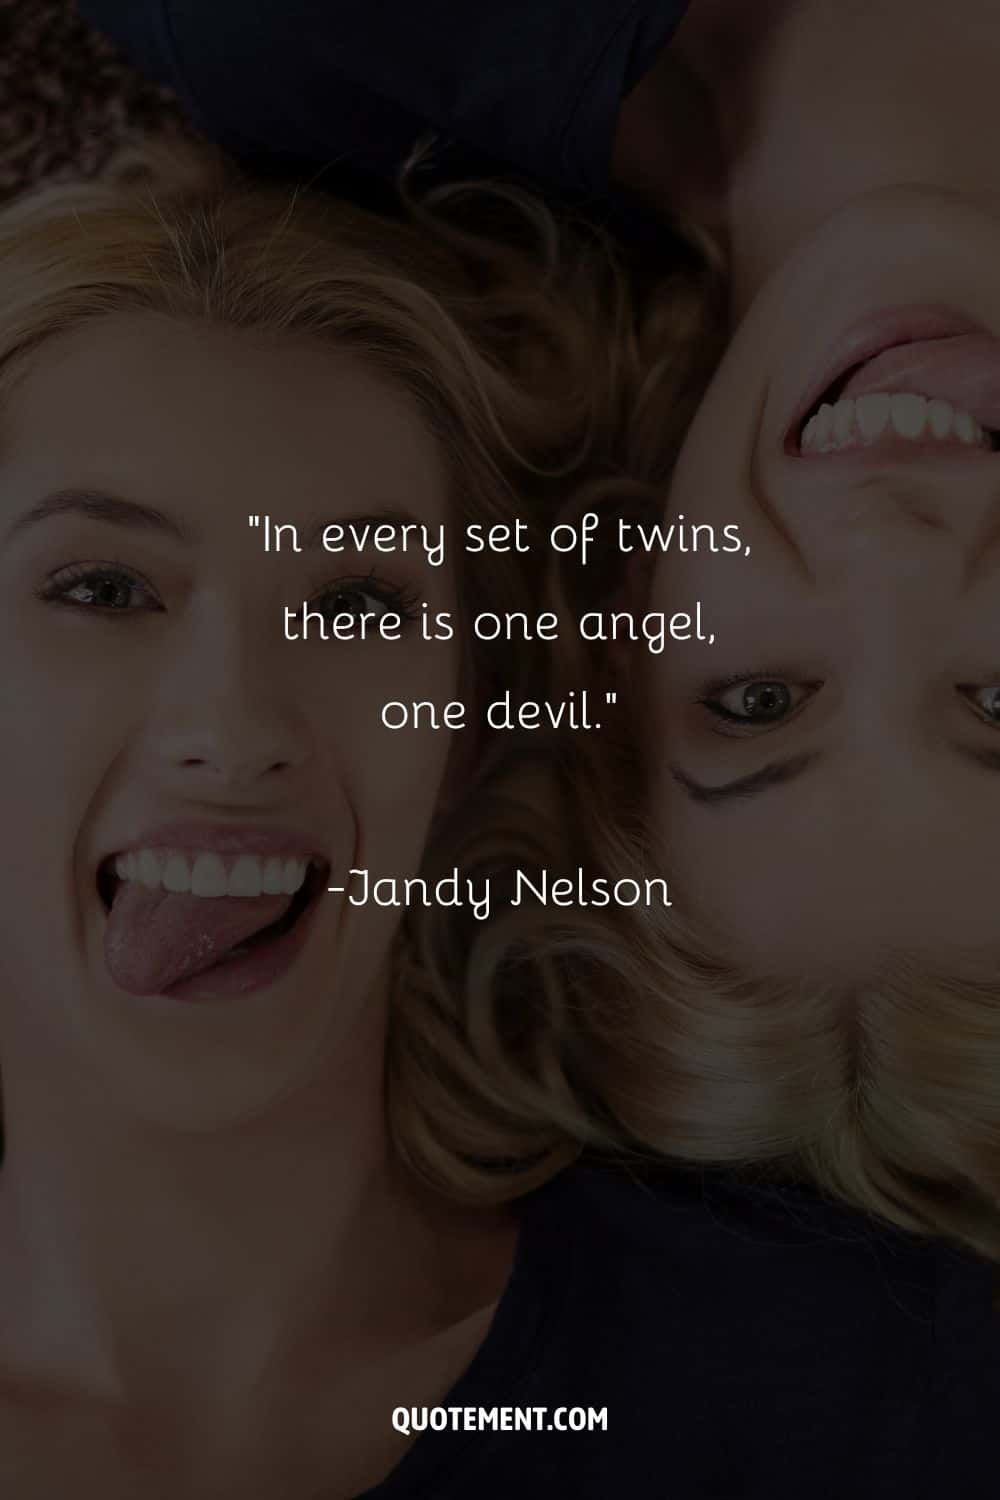 “In every set of twins, there is one angel, one devil” ― Jandy Nelson, I'll Give You the Sun